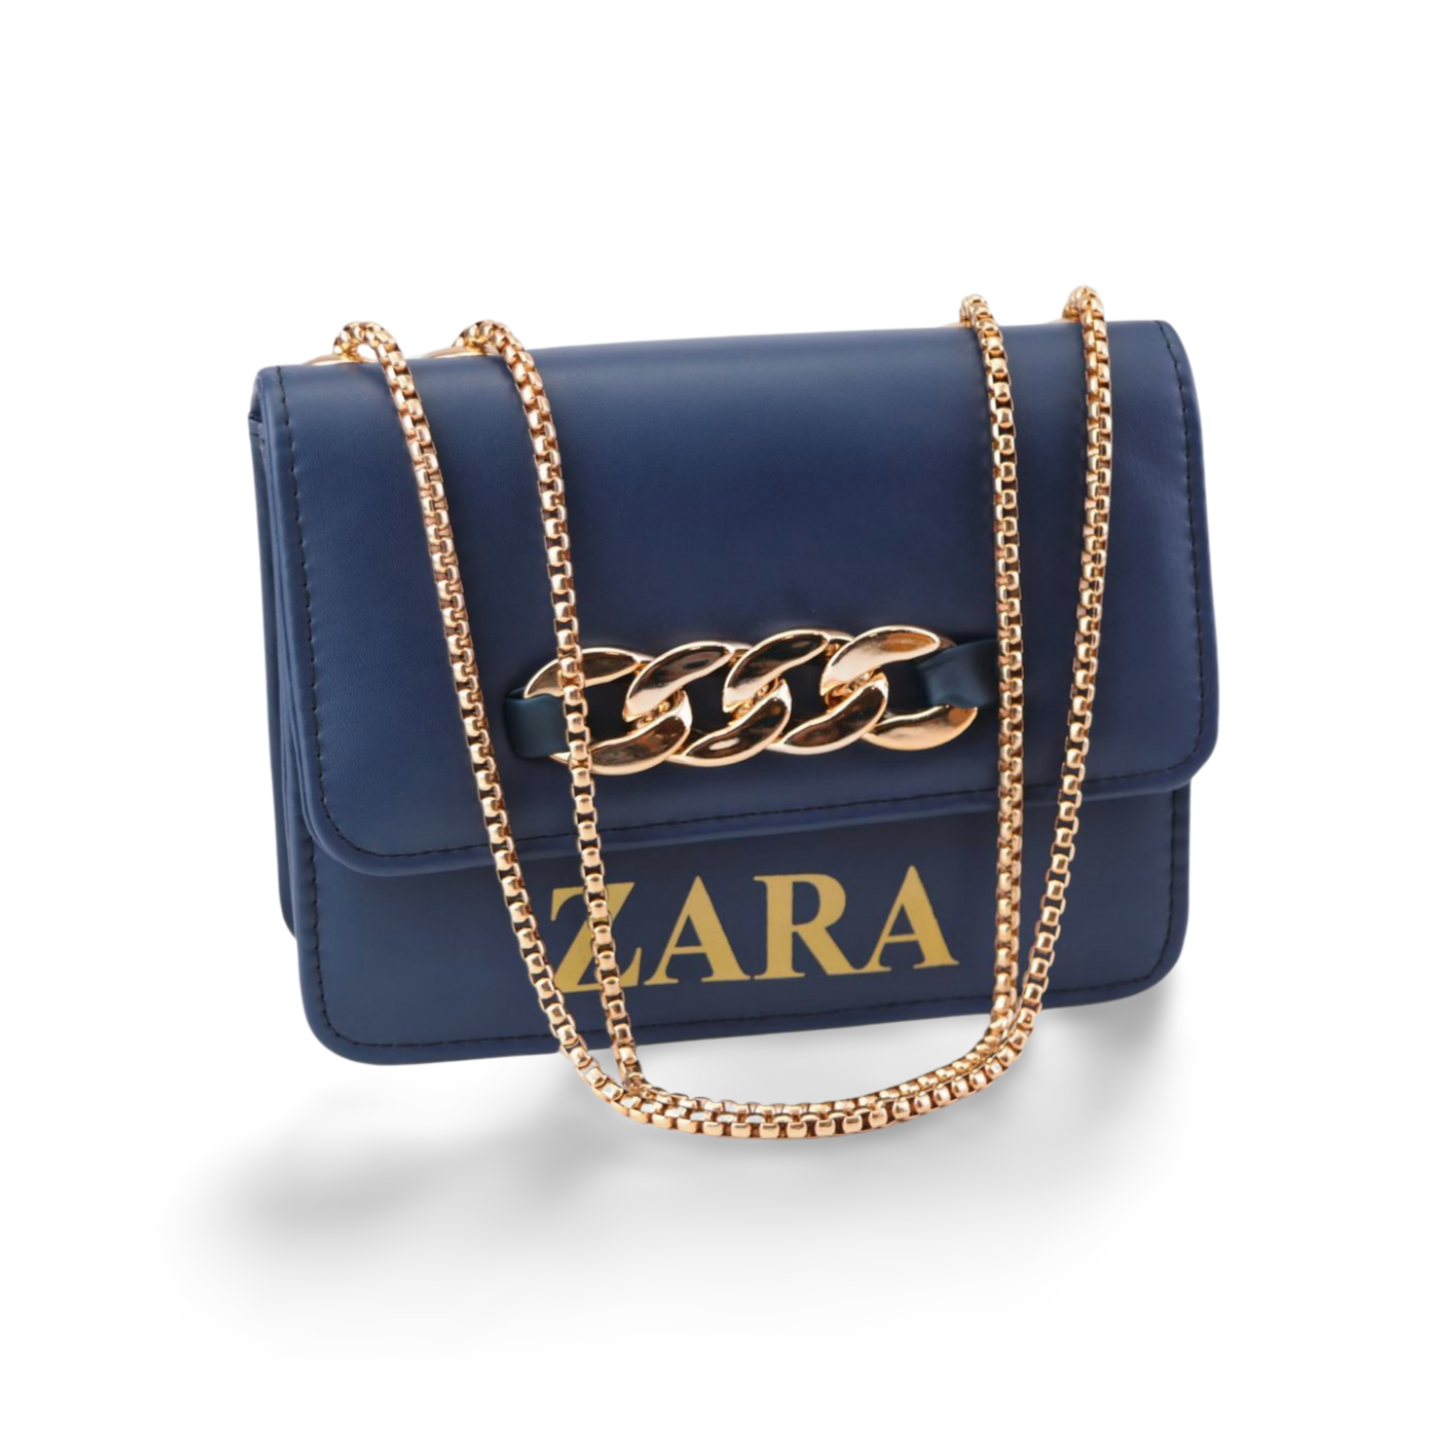 Gold Chain Shoulder Bag with Shoulder Chain - Stylish and Luxurious